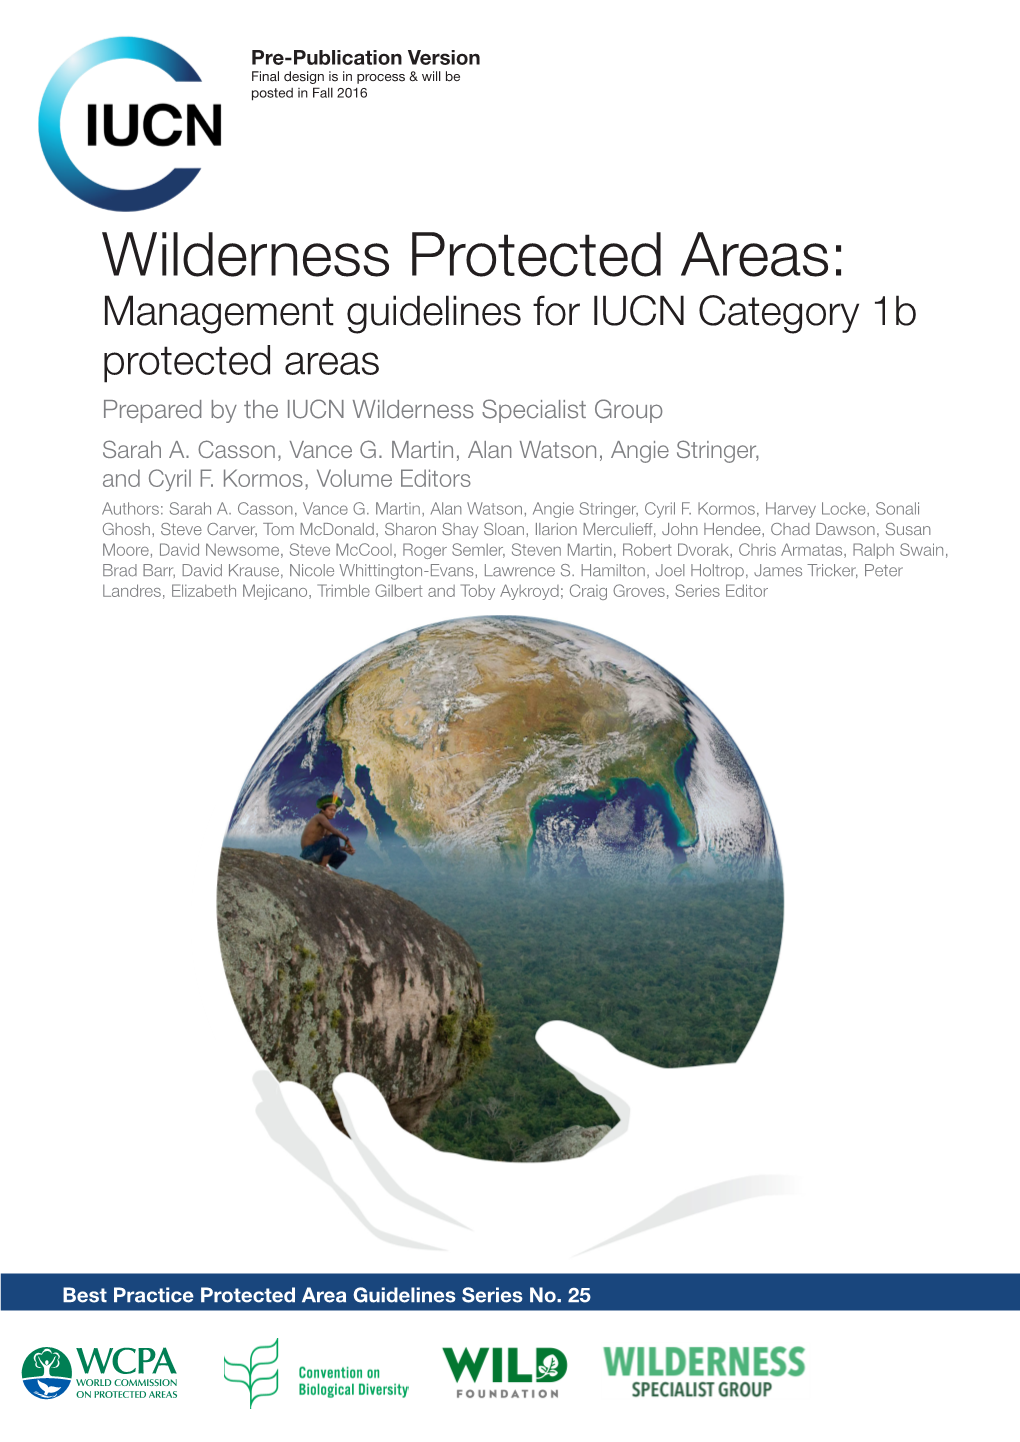 Wilderness Protected Areas: Management Guidelines for IUCN Category 1B Protected Areas Prepared by the IUCN Wilderness Specialist Group Sarah A